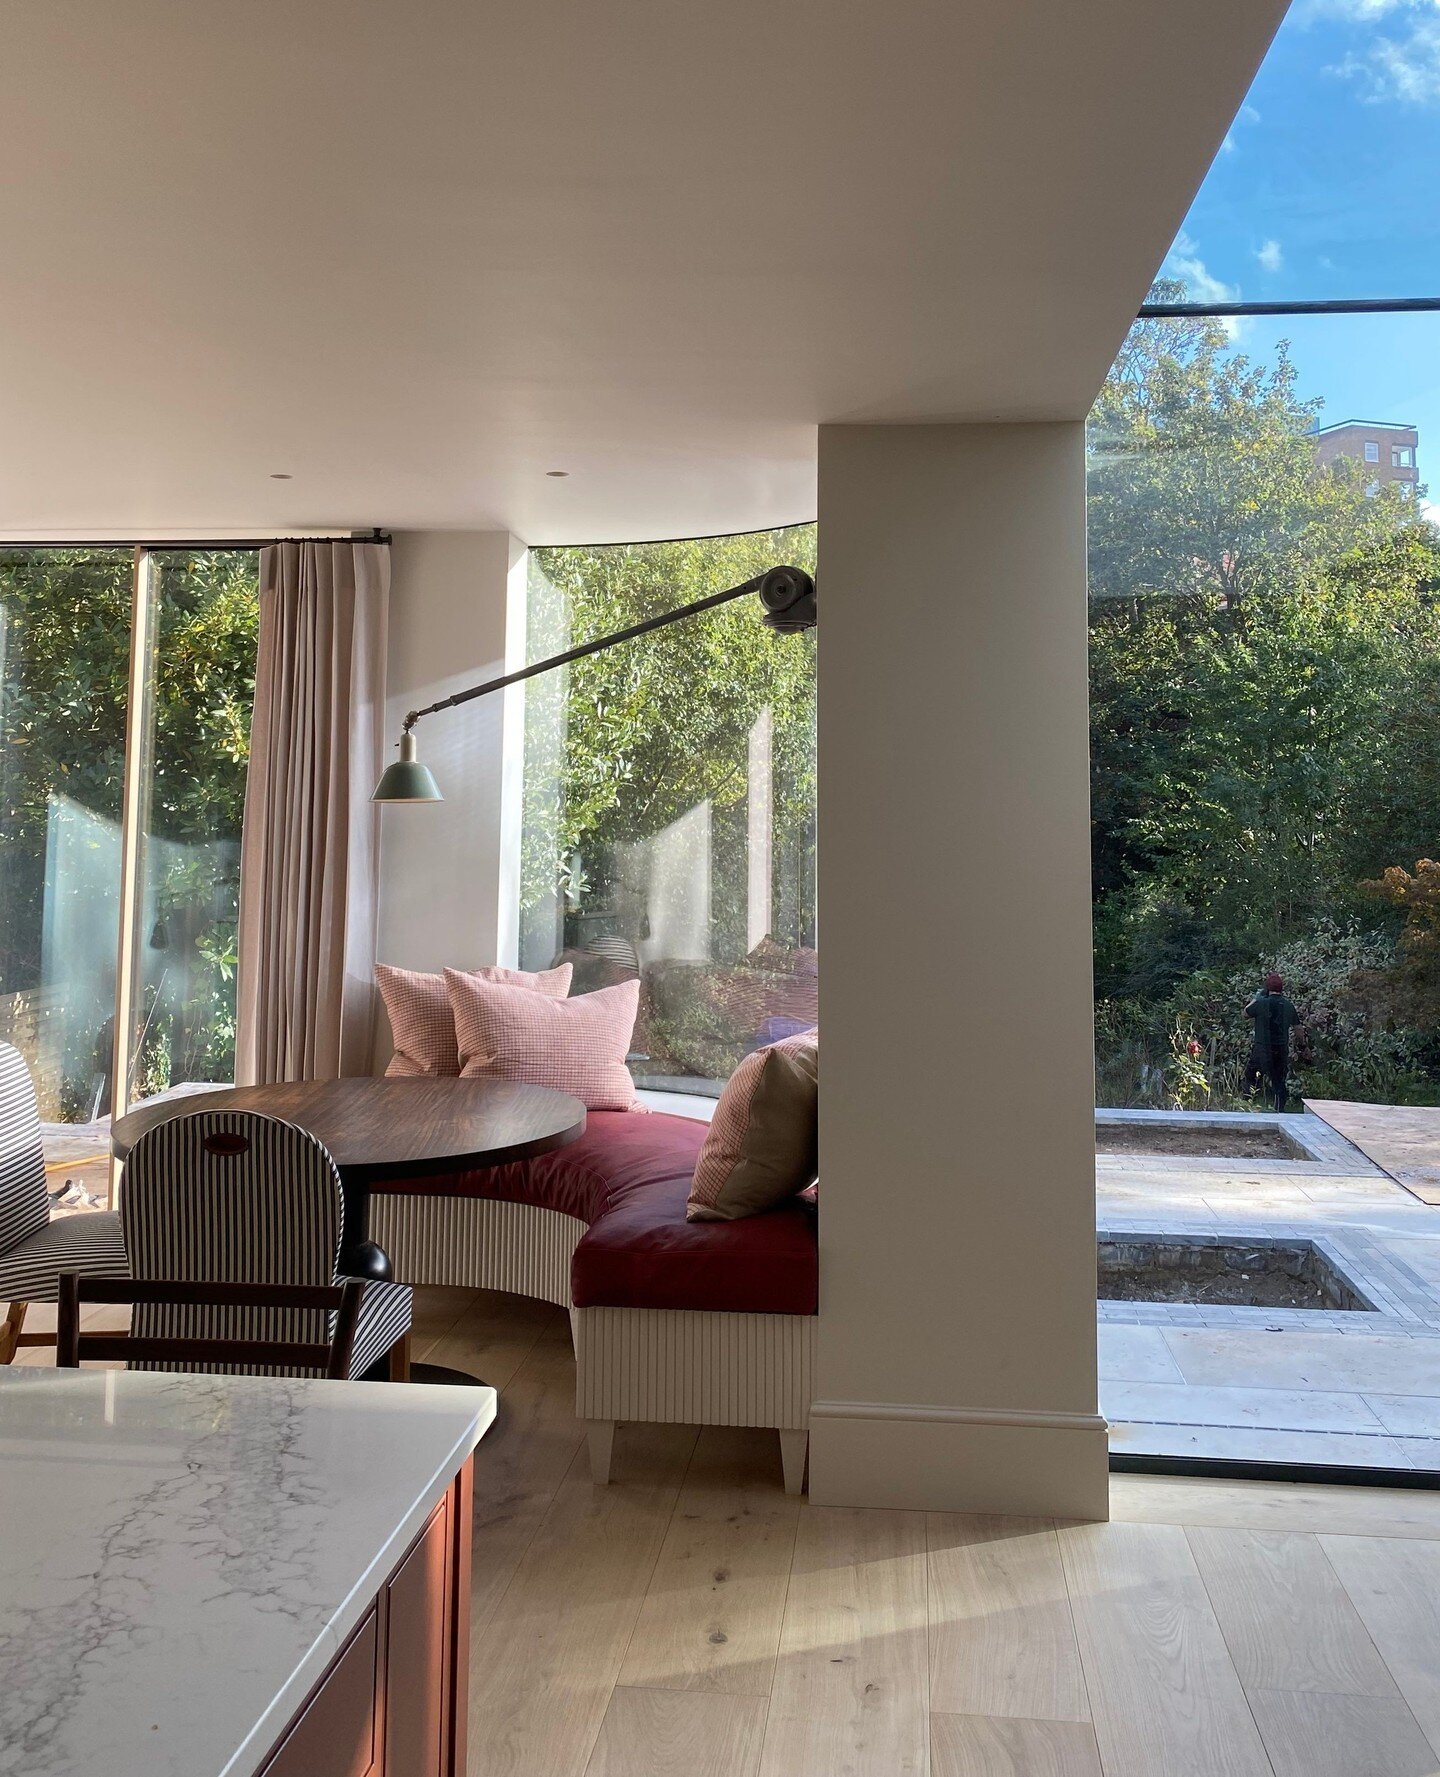 Our recently completed project in Kingston showcasing a beautiful curved glass window- creating the perfect breakfast nook. This is our first use of curved glazing and we couldn't be happier with how it looks. Its adds a playful dimension to the spac